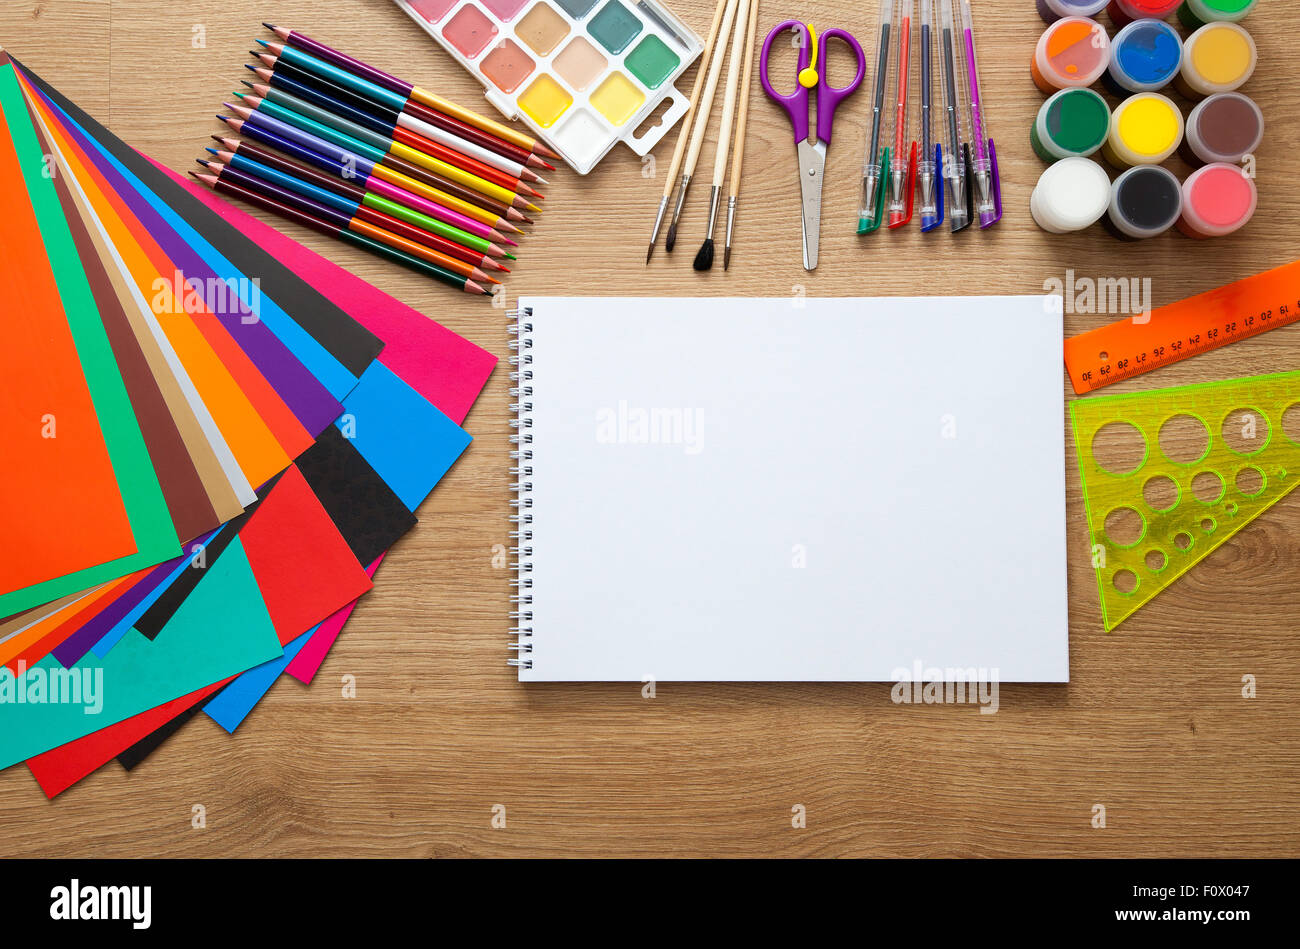 set of school supplies with pencil, colored pen, watercolor paint, notebook and scissors Stock Photo